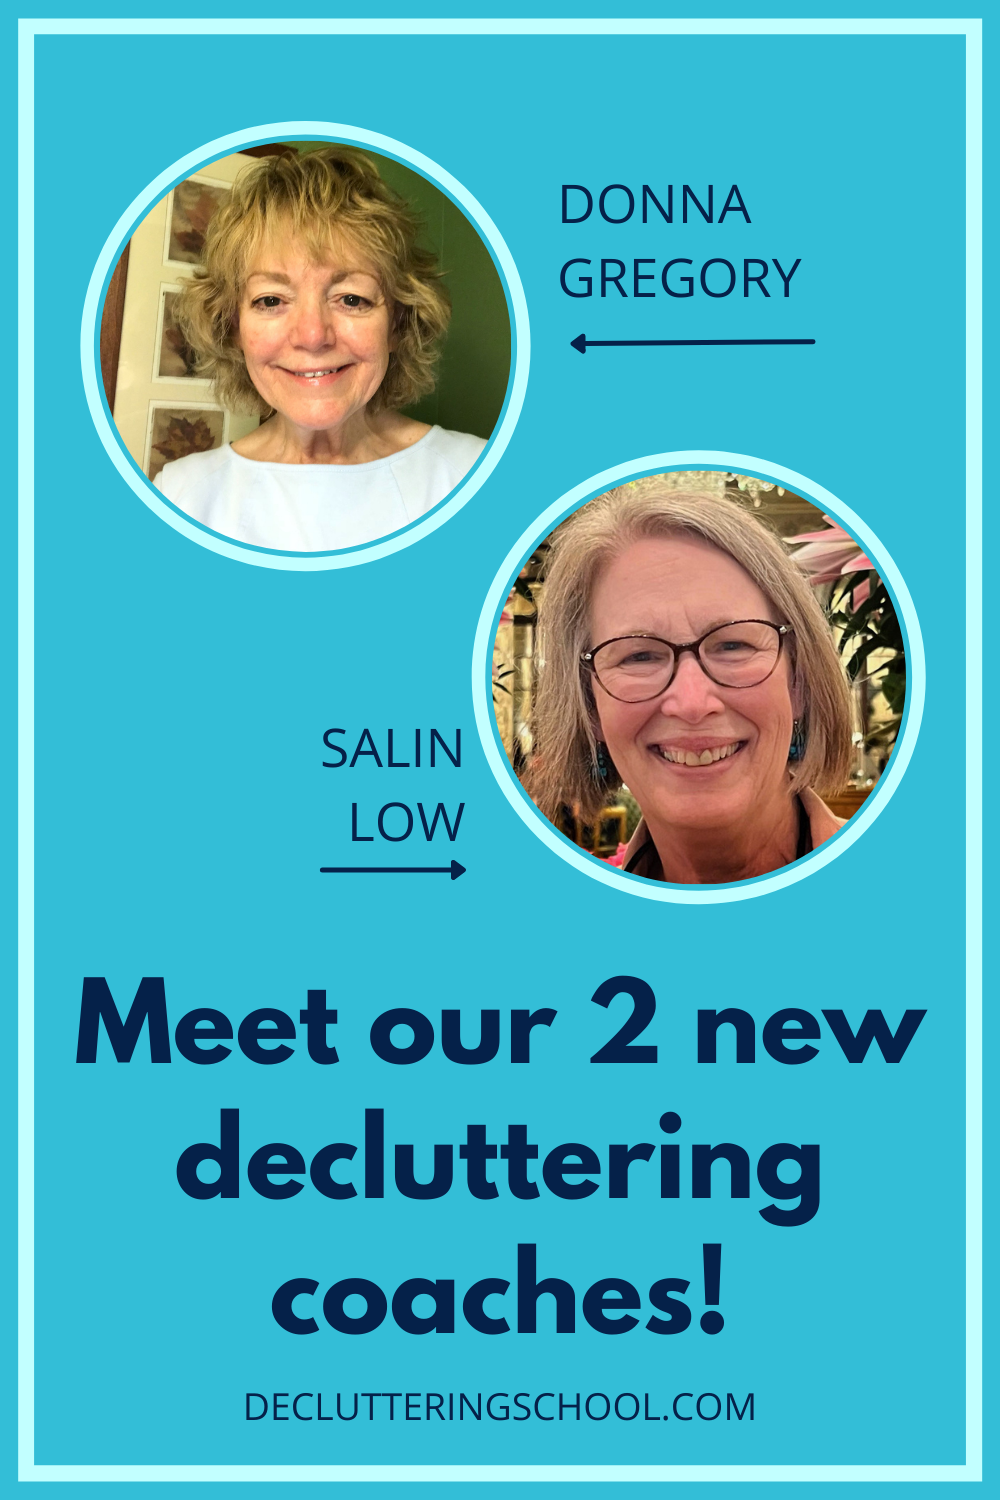 Meet our new decluttering coaches here at Decluttering School.